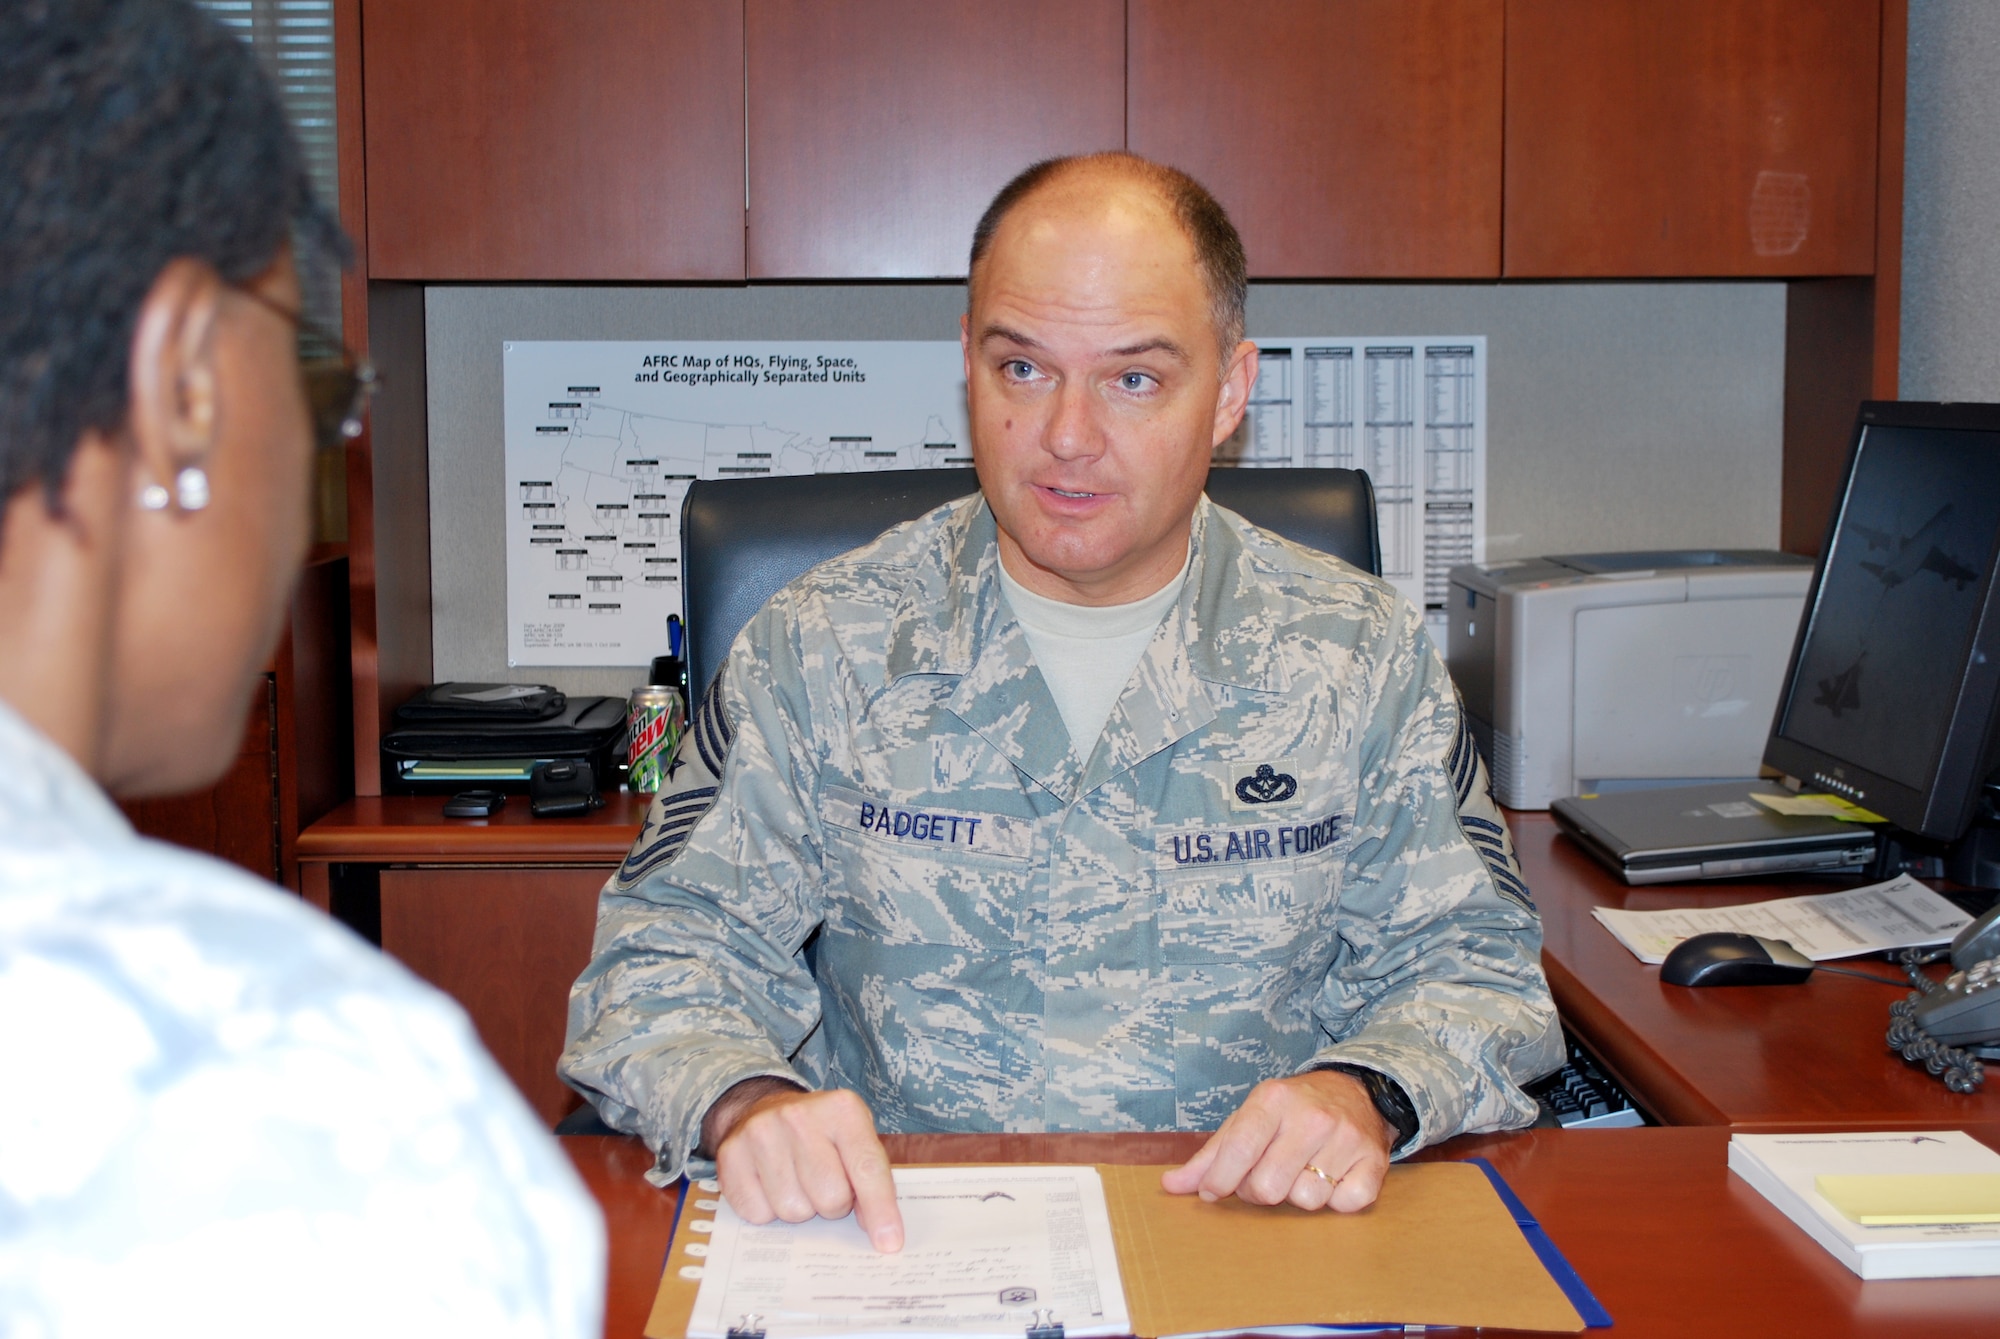 Chief Master Sgt. Dwight D. Badgett, command chief master sergeant for Air Force Reserve Command, speaks with Senior Master Sgt. Cathy Williams, special assistant to the command chief, about items of interest to Airmen at the command headquarters at Robins Air Force Base Ga. Chief Badgett advises the commander on all matters concerning the health, morale, welfare and effective utilization of enlisted Airmen at 66-plus locations. (U.S. Air Force photo/Staff Sgt. Celena Wilson)